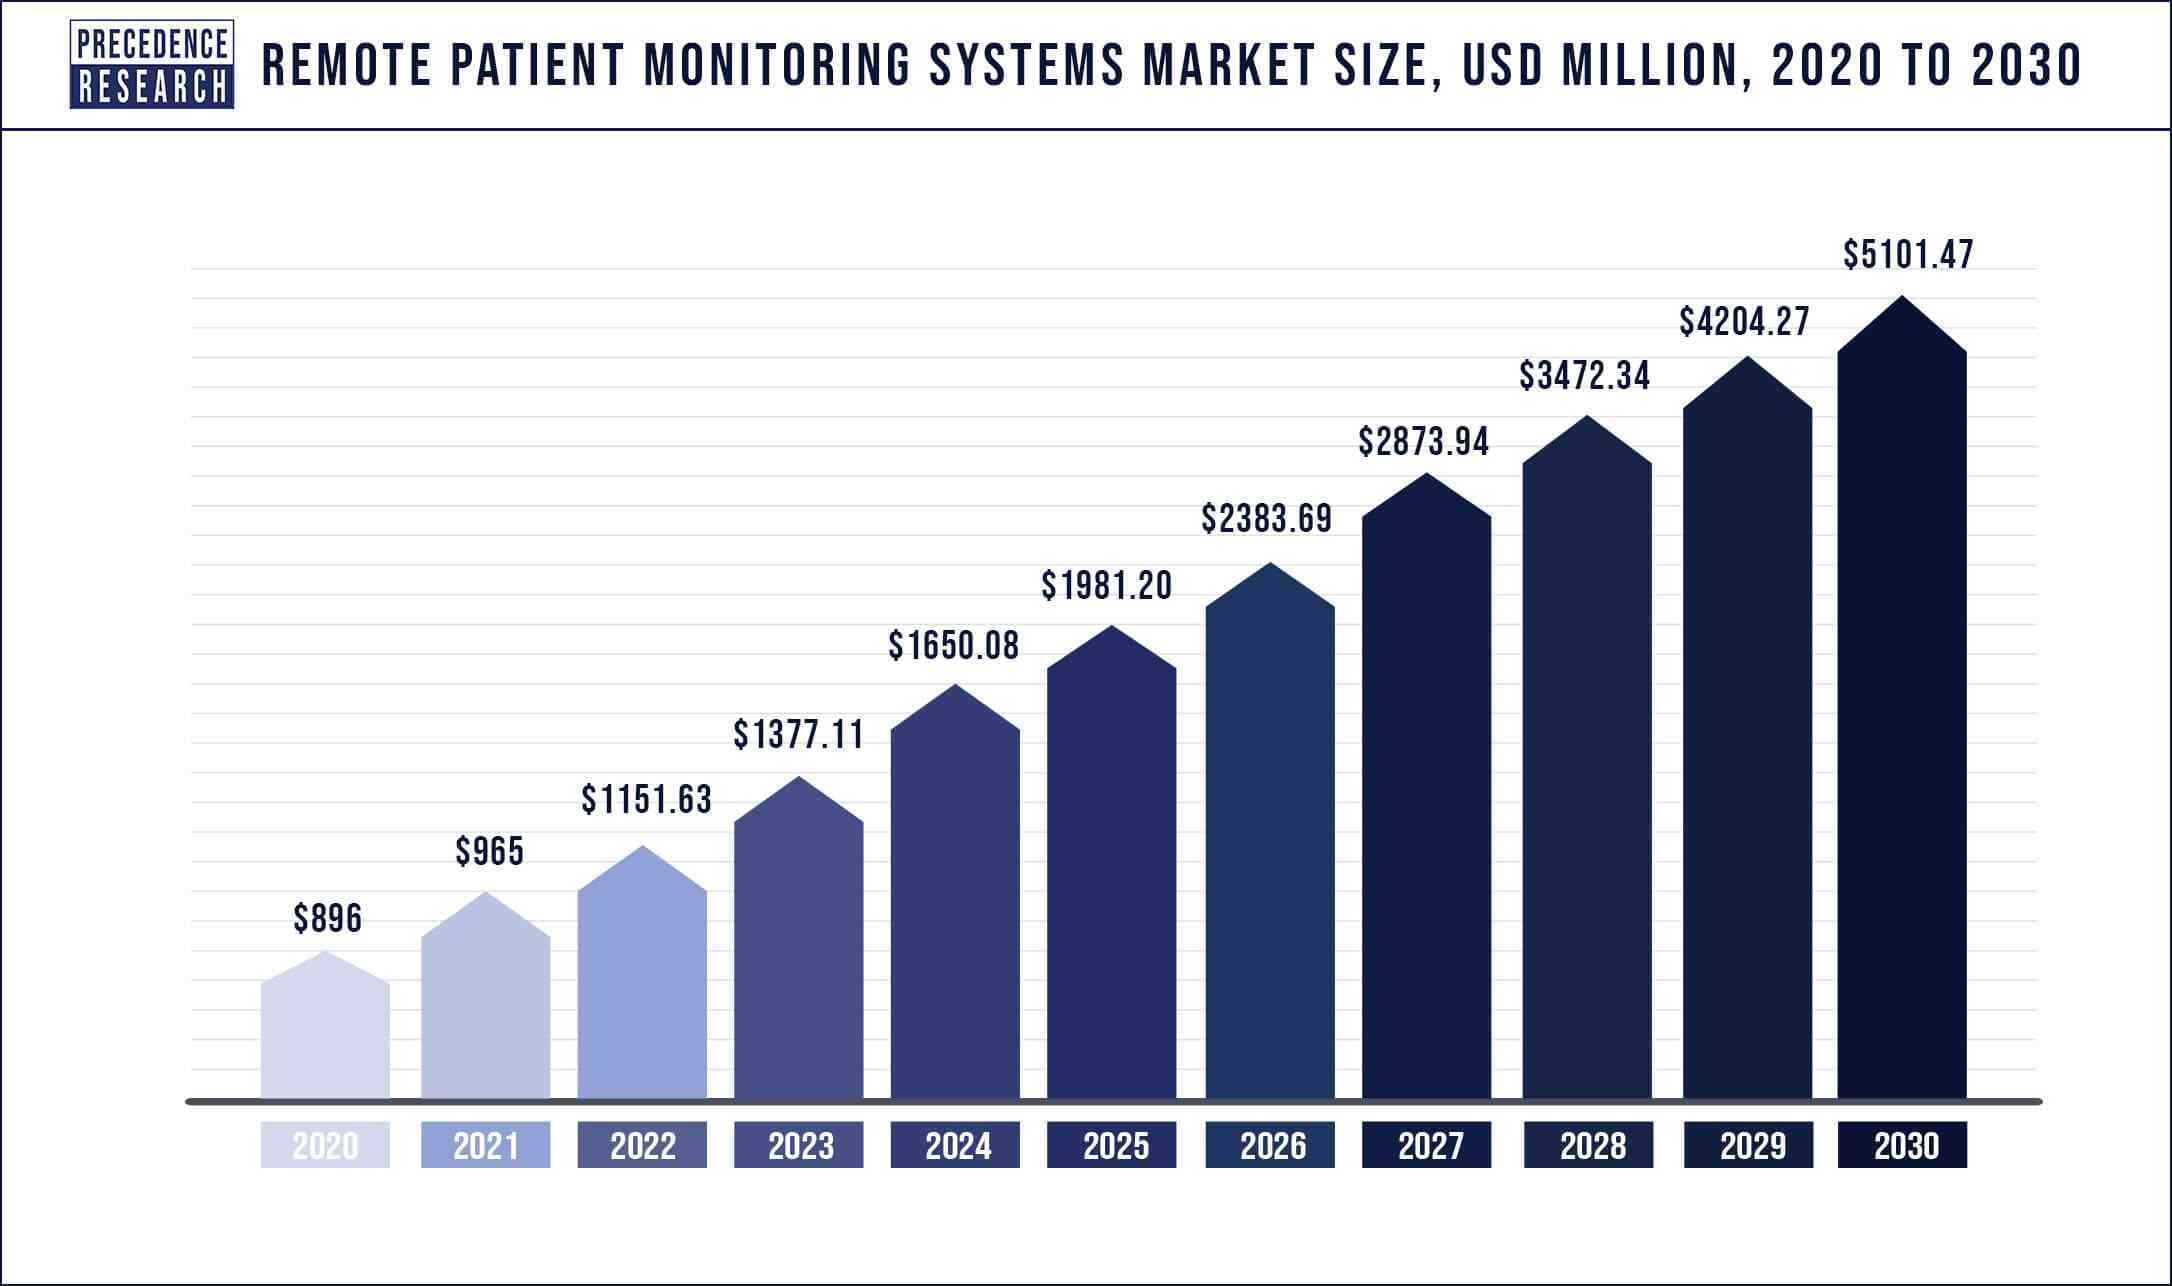 Remote Patient Monitoring Systems Market Size 2022 to 2030